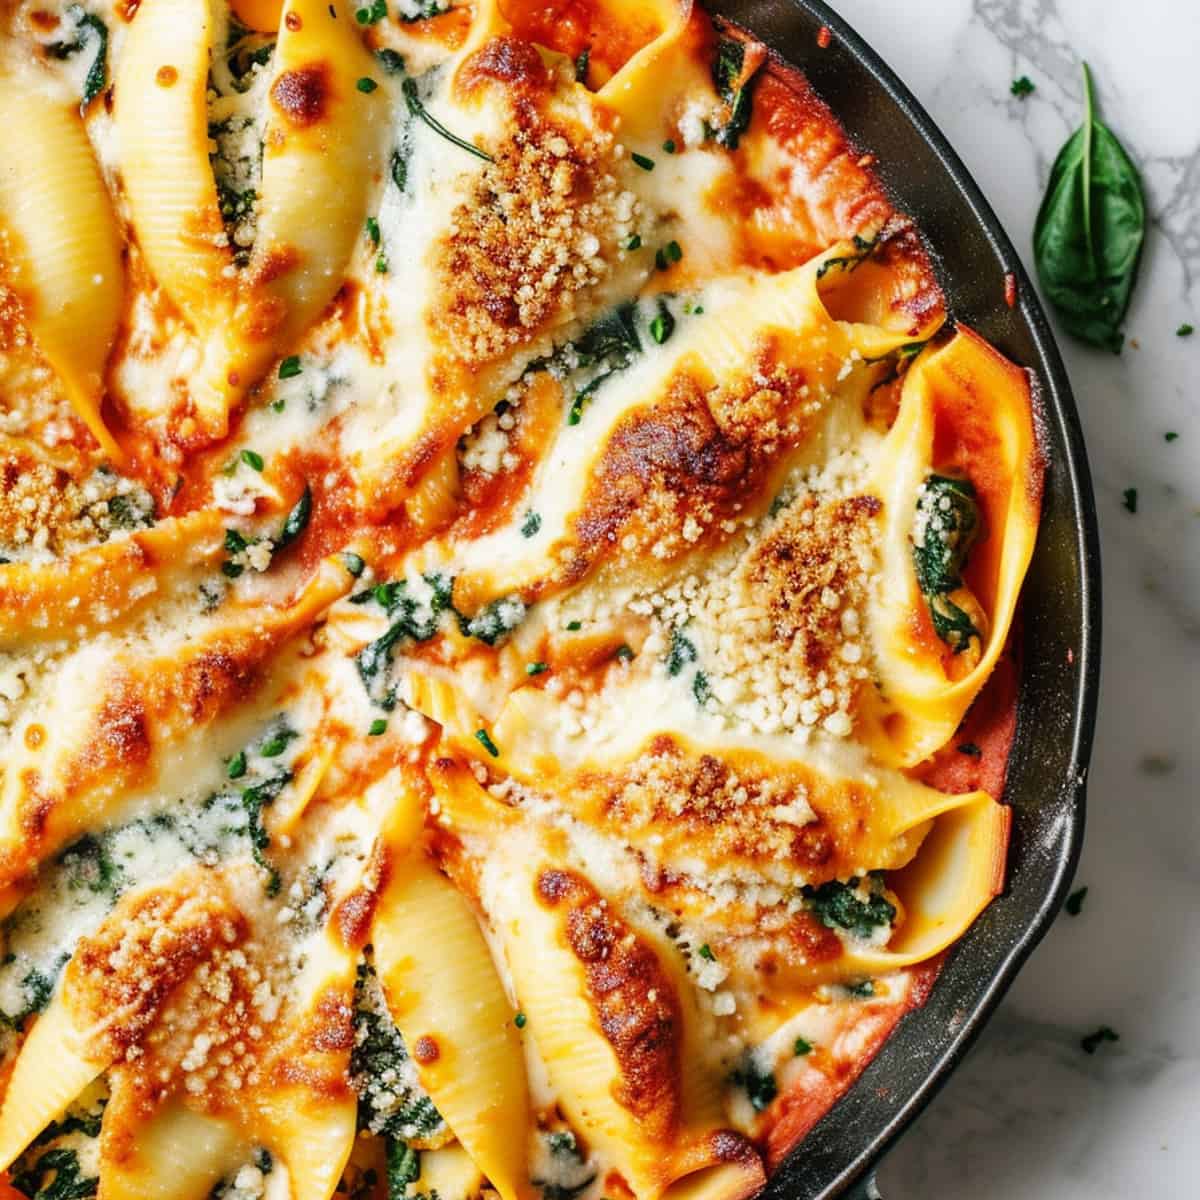 Ricotta and spinach stuffed pasta shells in a cast iron skillet.